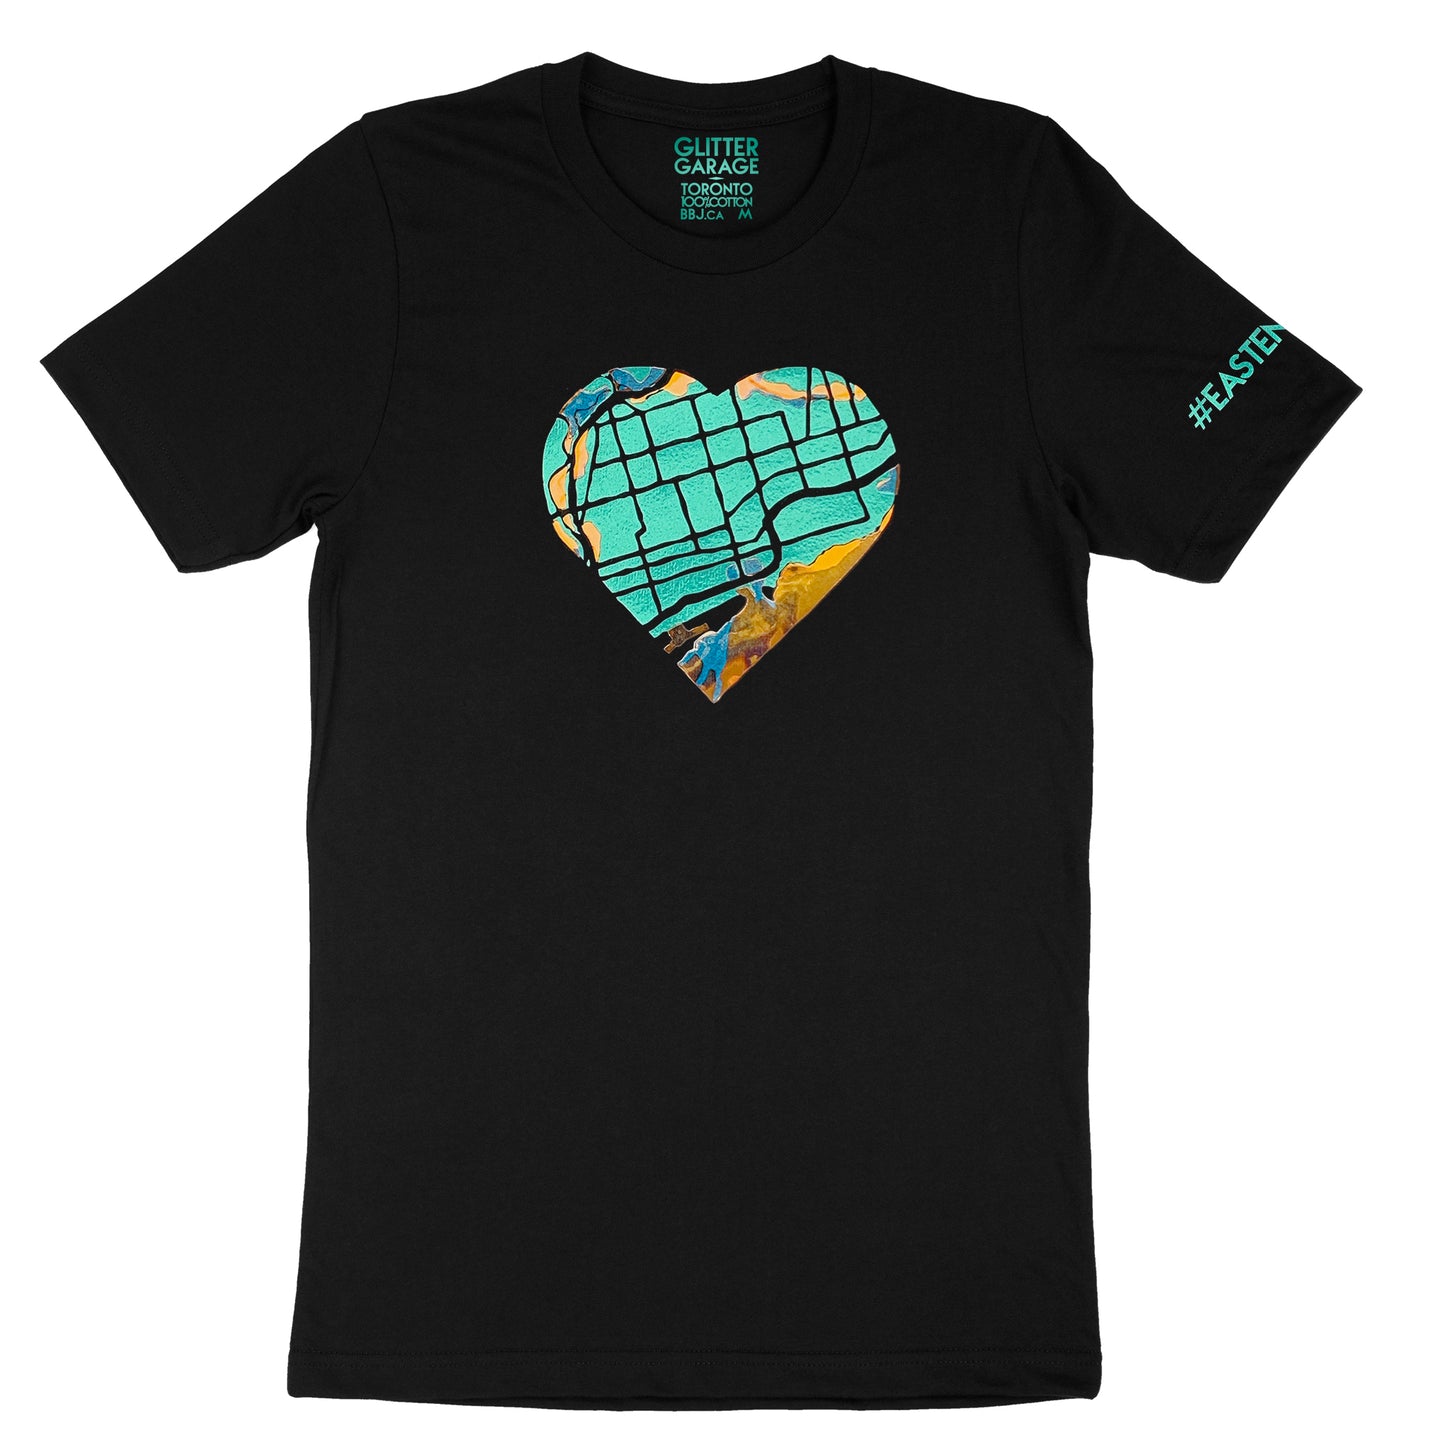 East End Love black unisex tee with heart-shaped map in teal and opal vinyl - by BBJ in collaboration with East End Arts